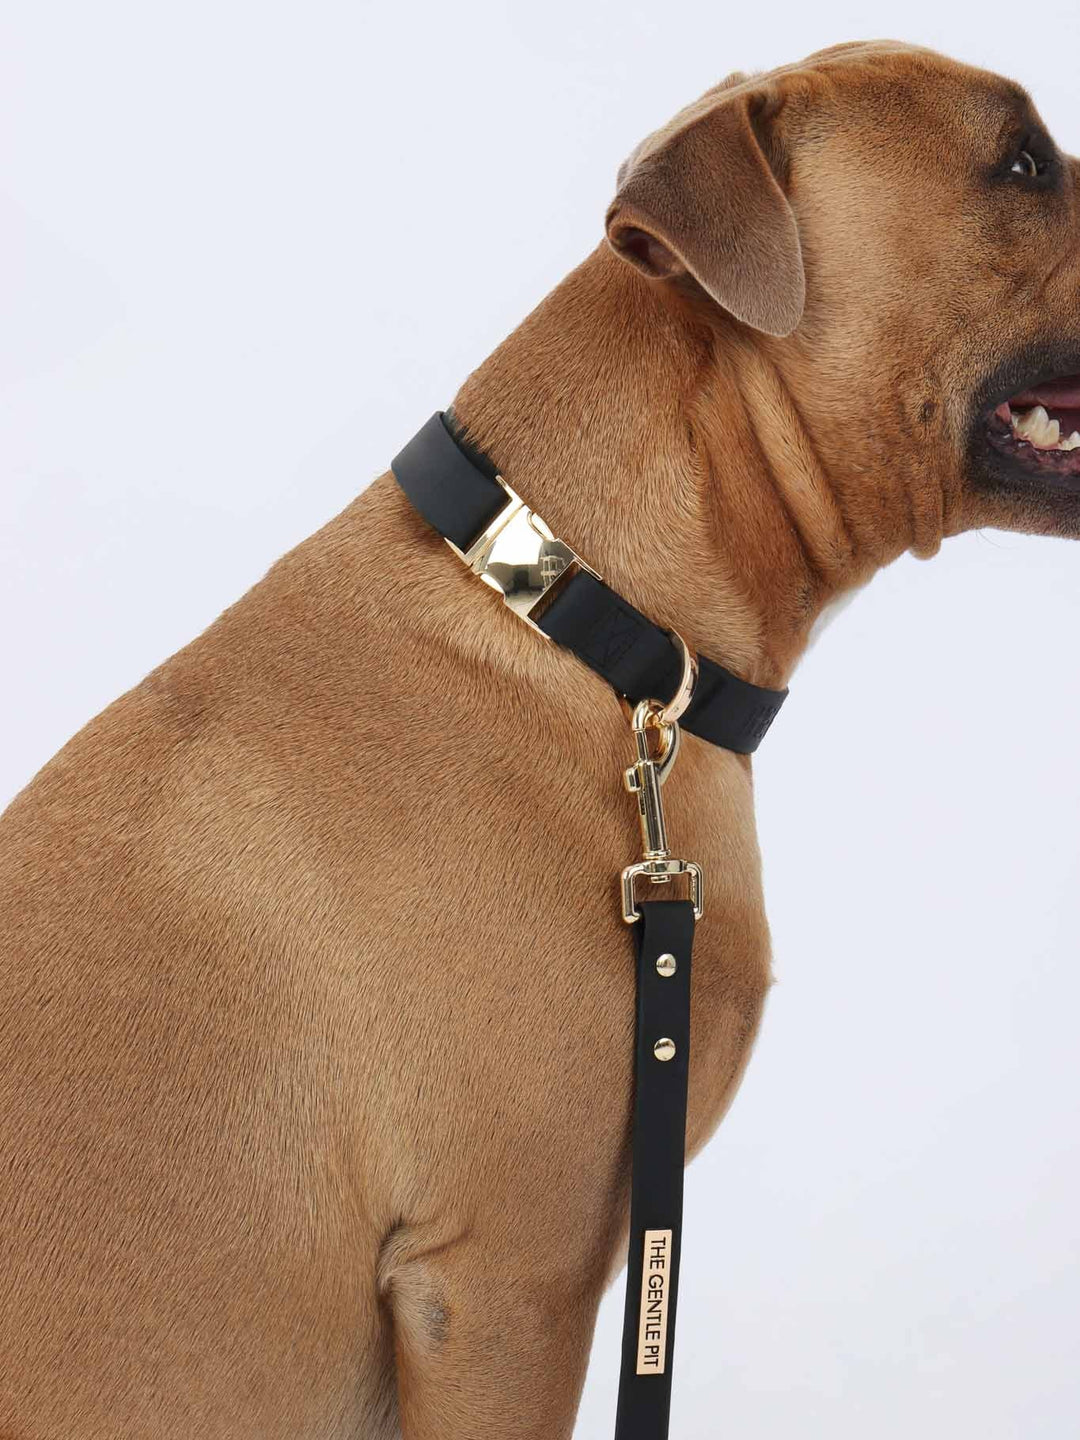 Authentic Louis Vuitton dog collar & lead For small dogs from japan